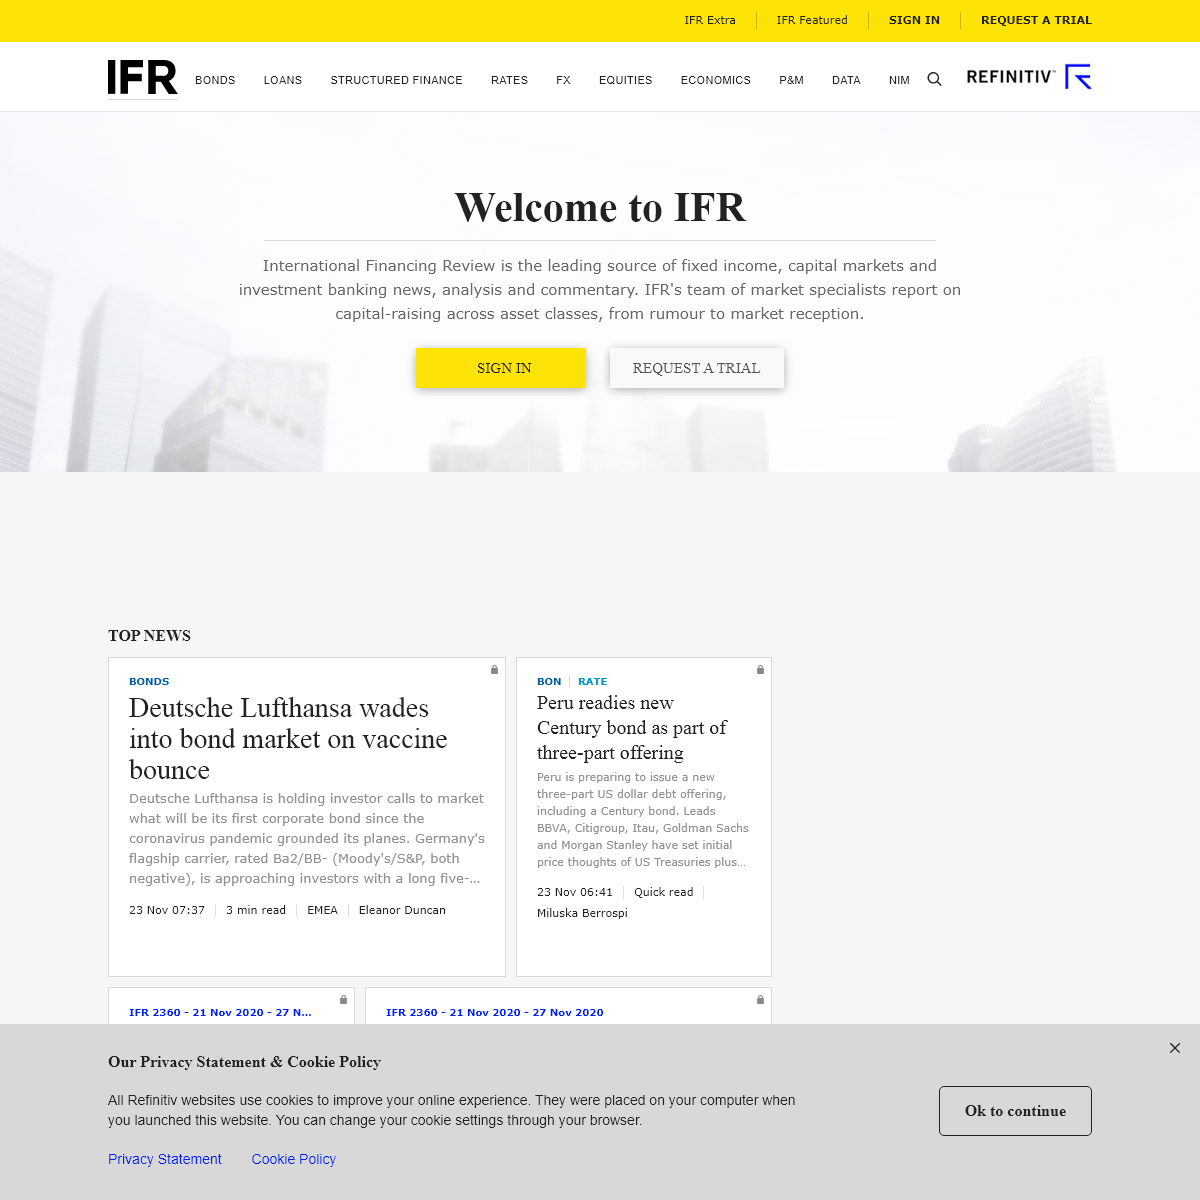 A complete backup of ifre.com